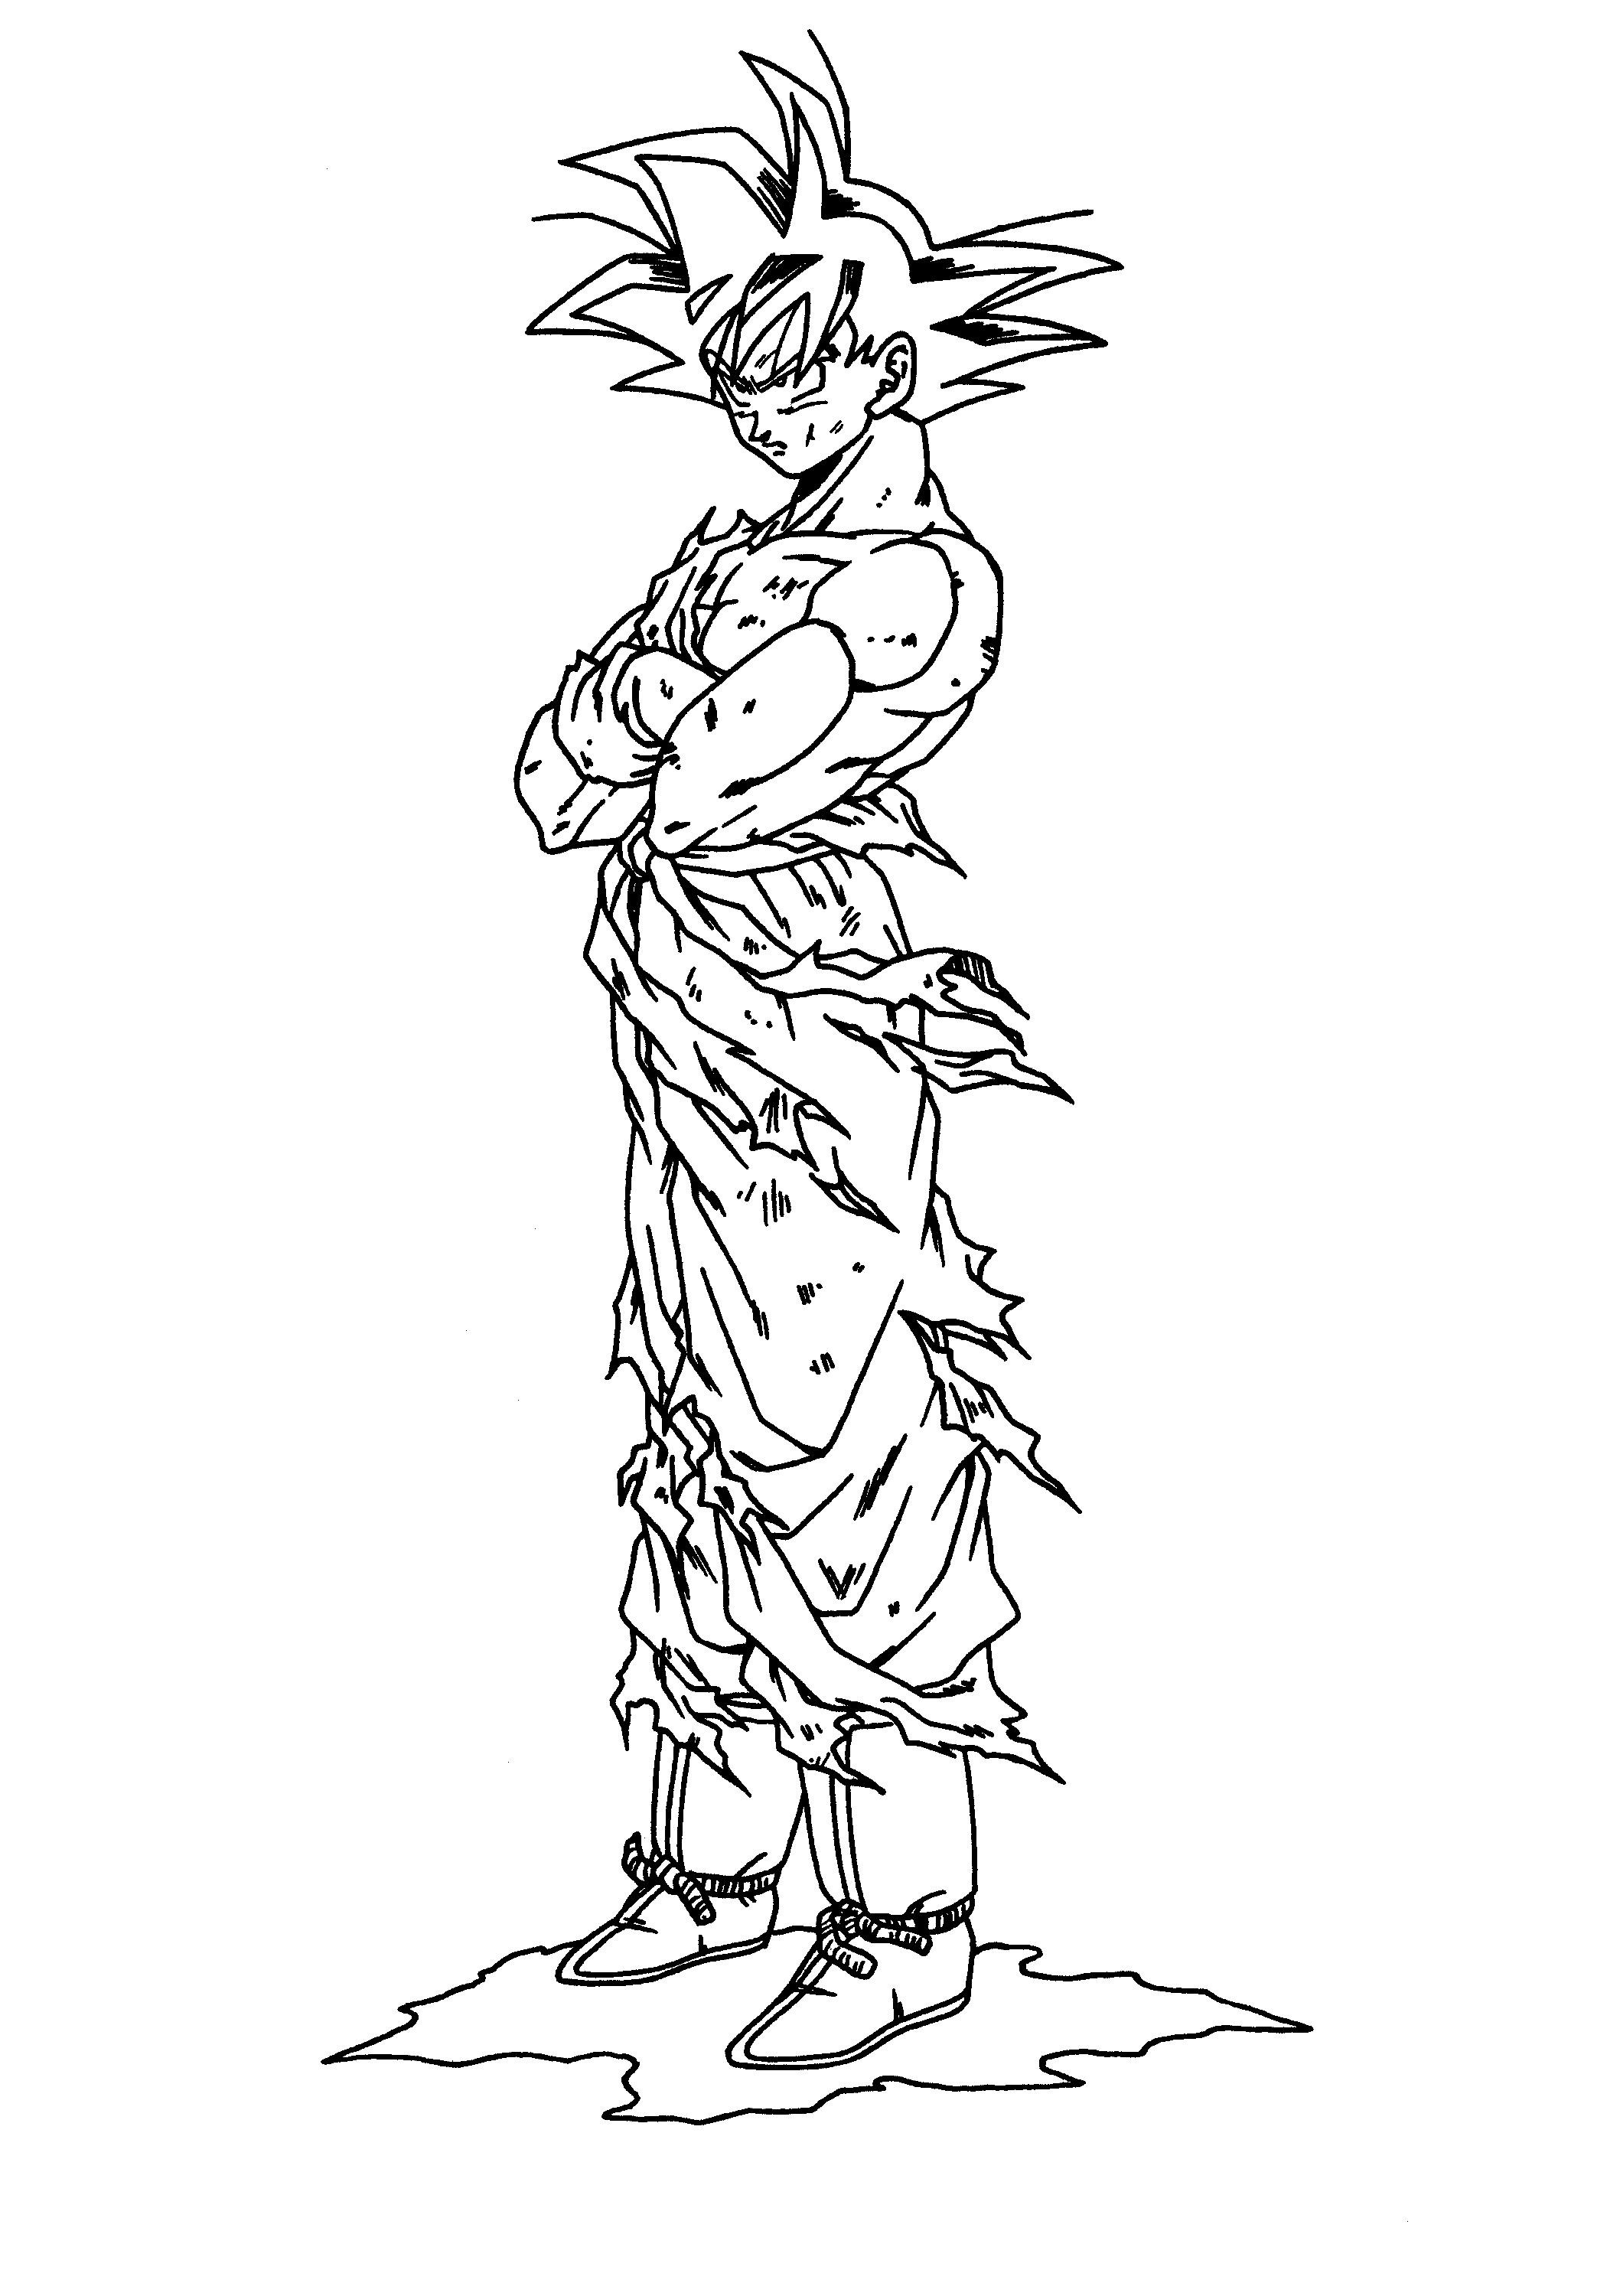 Download Free Printable Dragon Ball Z Coloring Pages For Kids